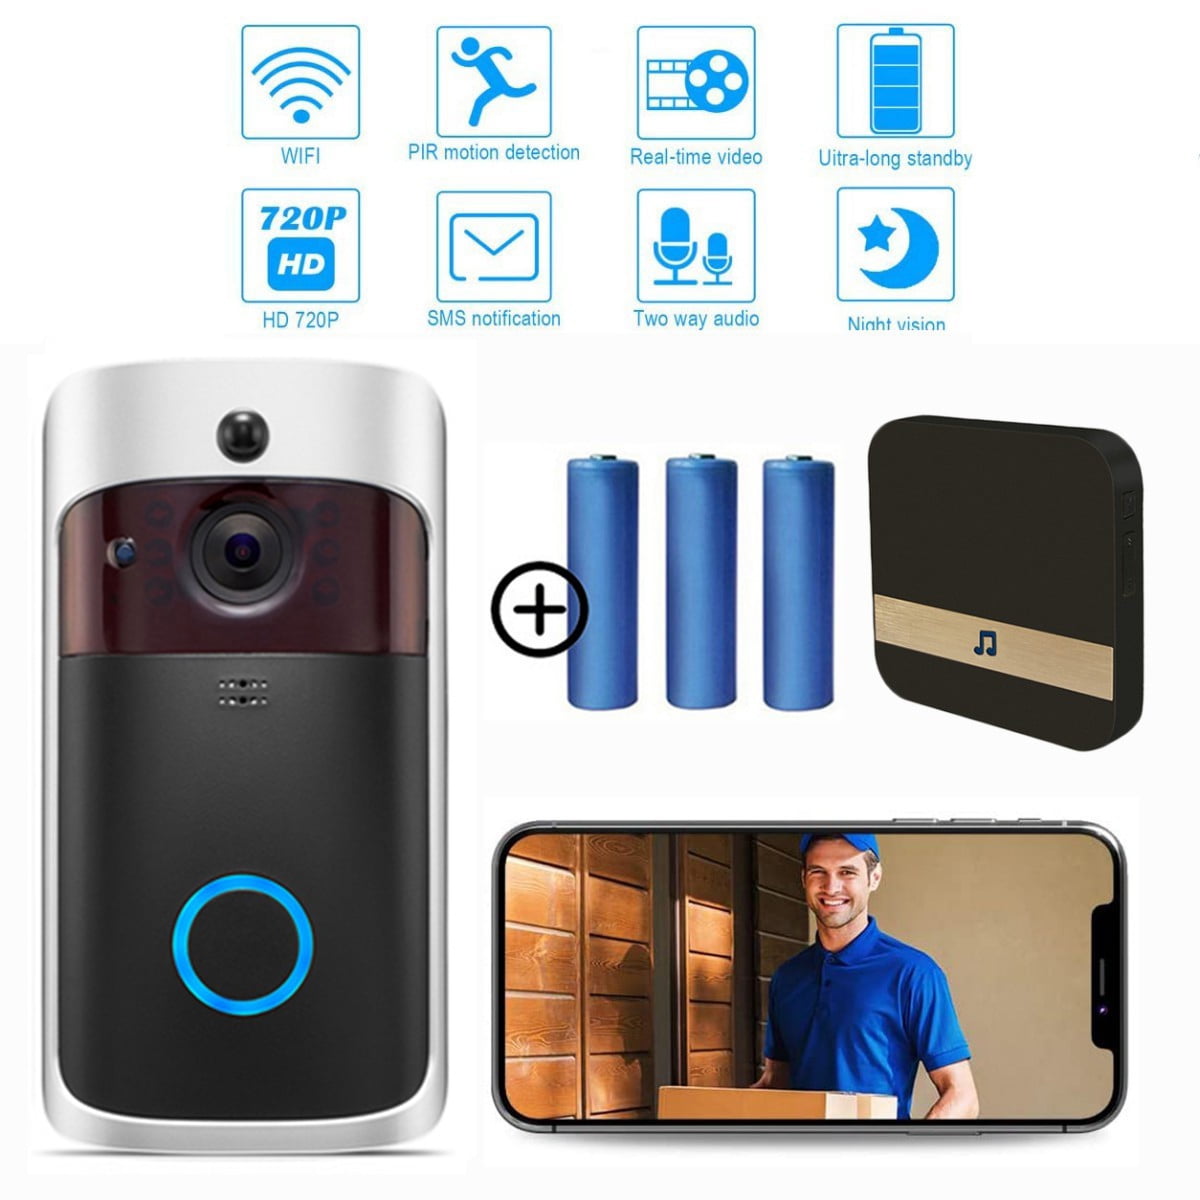 Free Cloud Storage 1080P PIR Motion Detection 2 way Audio Camera Doorbell Video Door Bell Wireless WiFi with Chime For Smart Home Security Camera System Night Vision